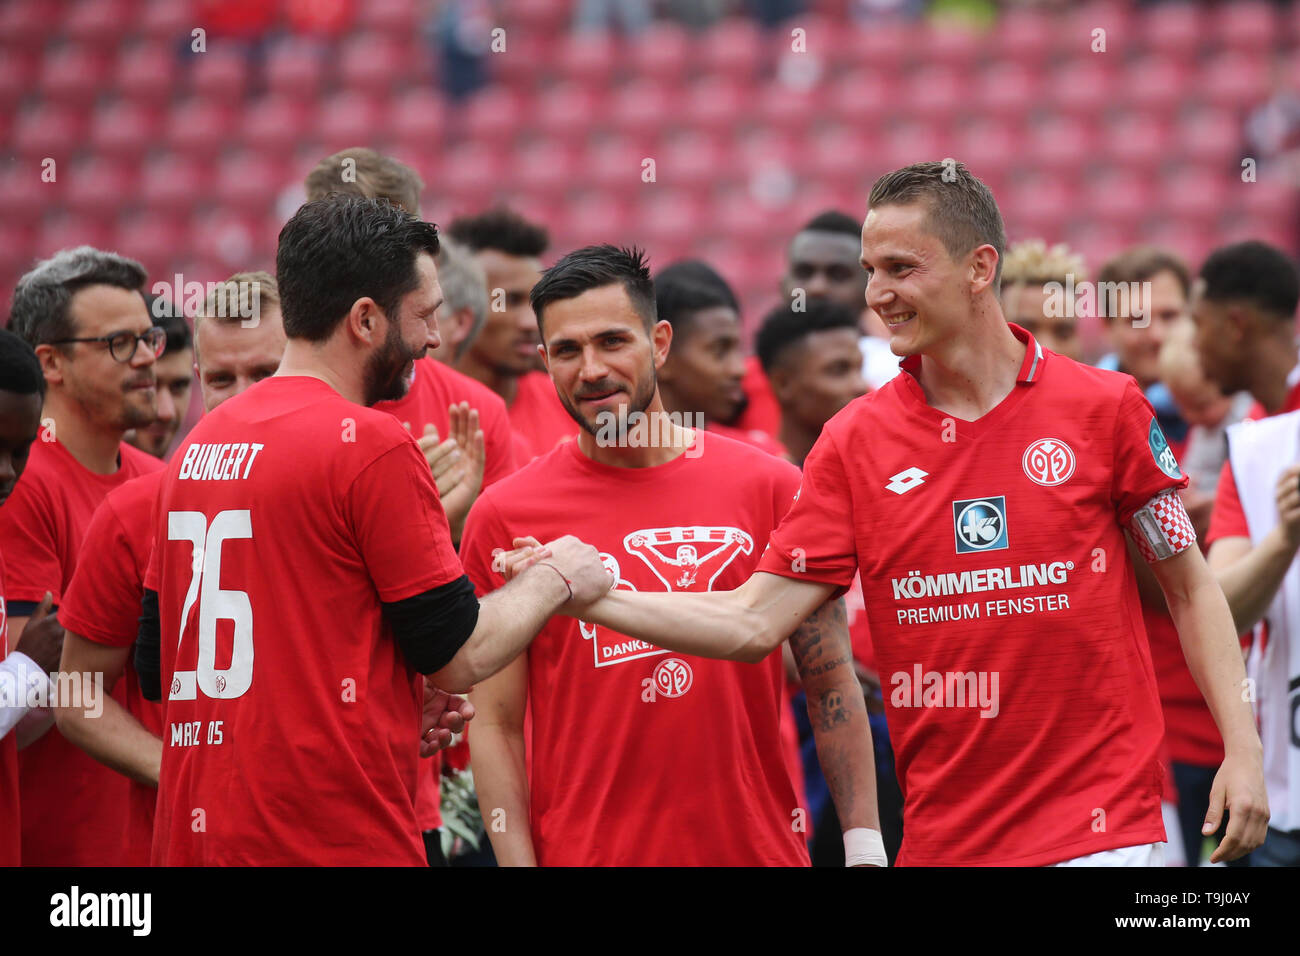 Mainz, Germany. 18th May, 2019. Soccer: Bundesliga, FSV Mainz 05 - 1899  Hoffenheim, 34th matchday in the Opel Arena, Niko Bungert from Mainz says  goodbye to the team. Credit: Thomas Frey/dpa -